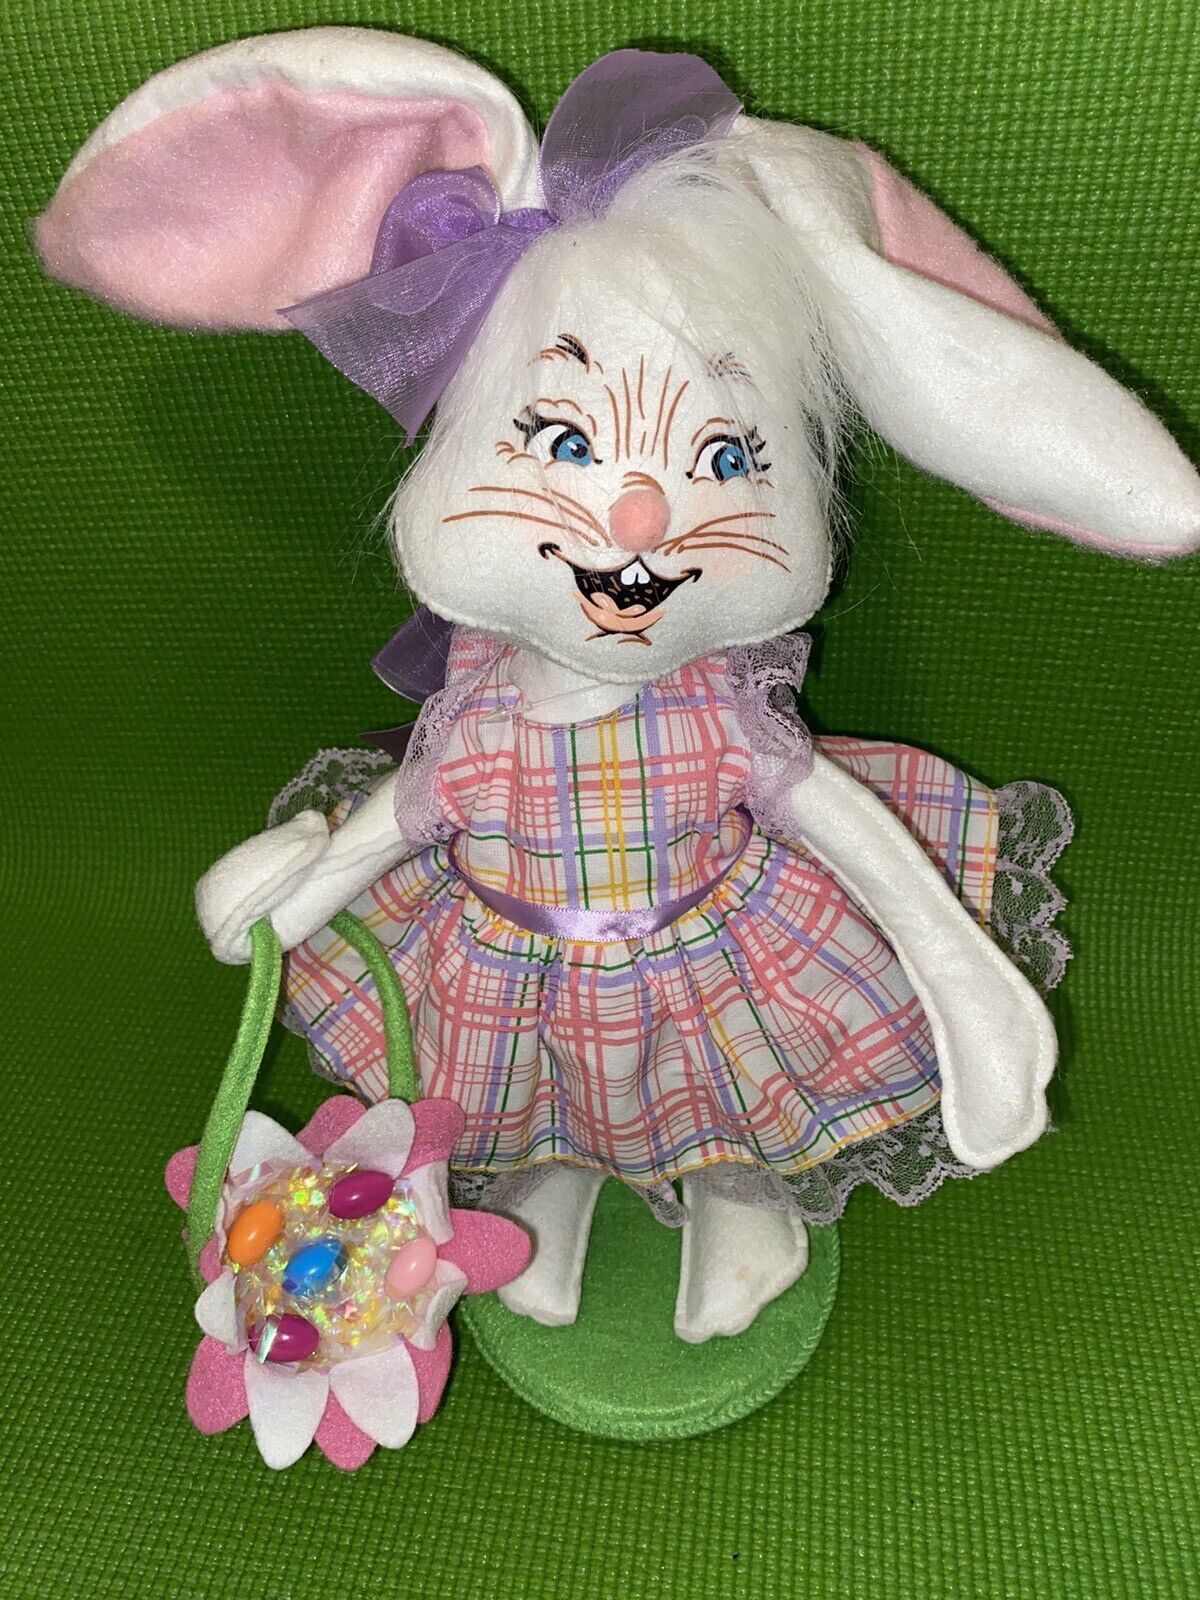 Annalee Easter Parade Girl Bunny Jelly Bean Basket 12” Pink Striped Dress 2016